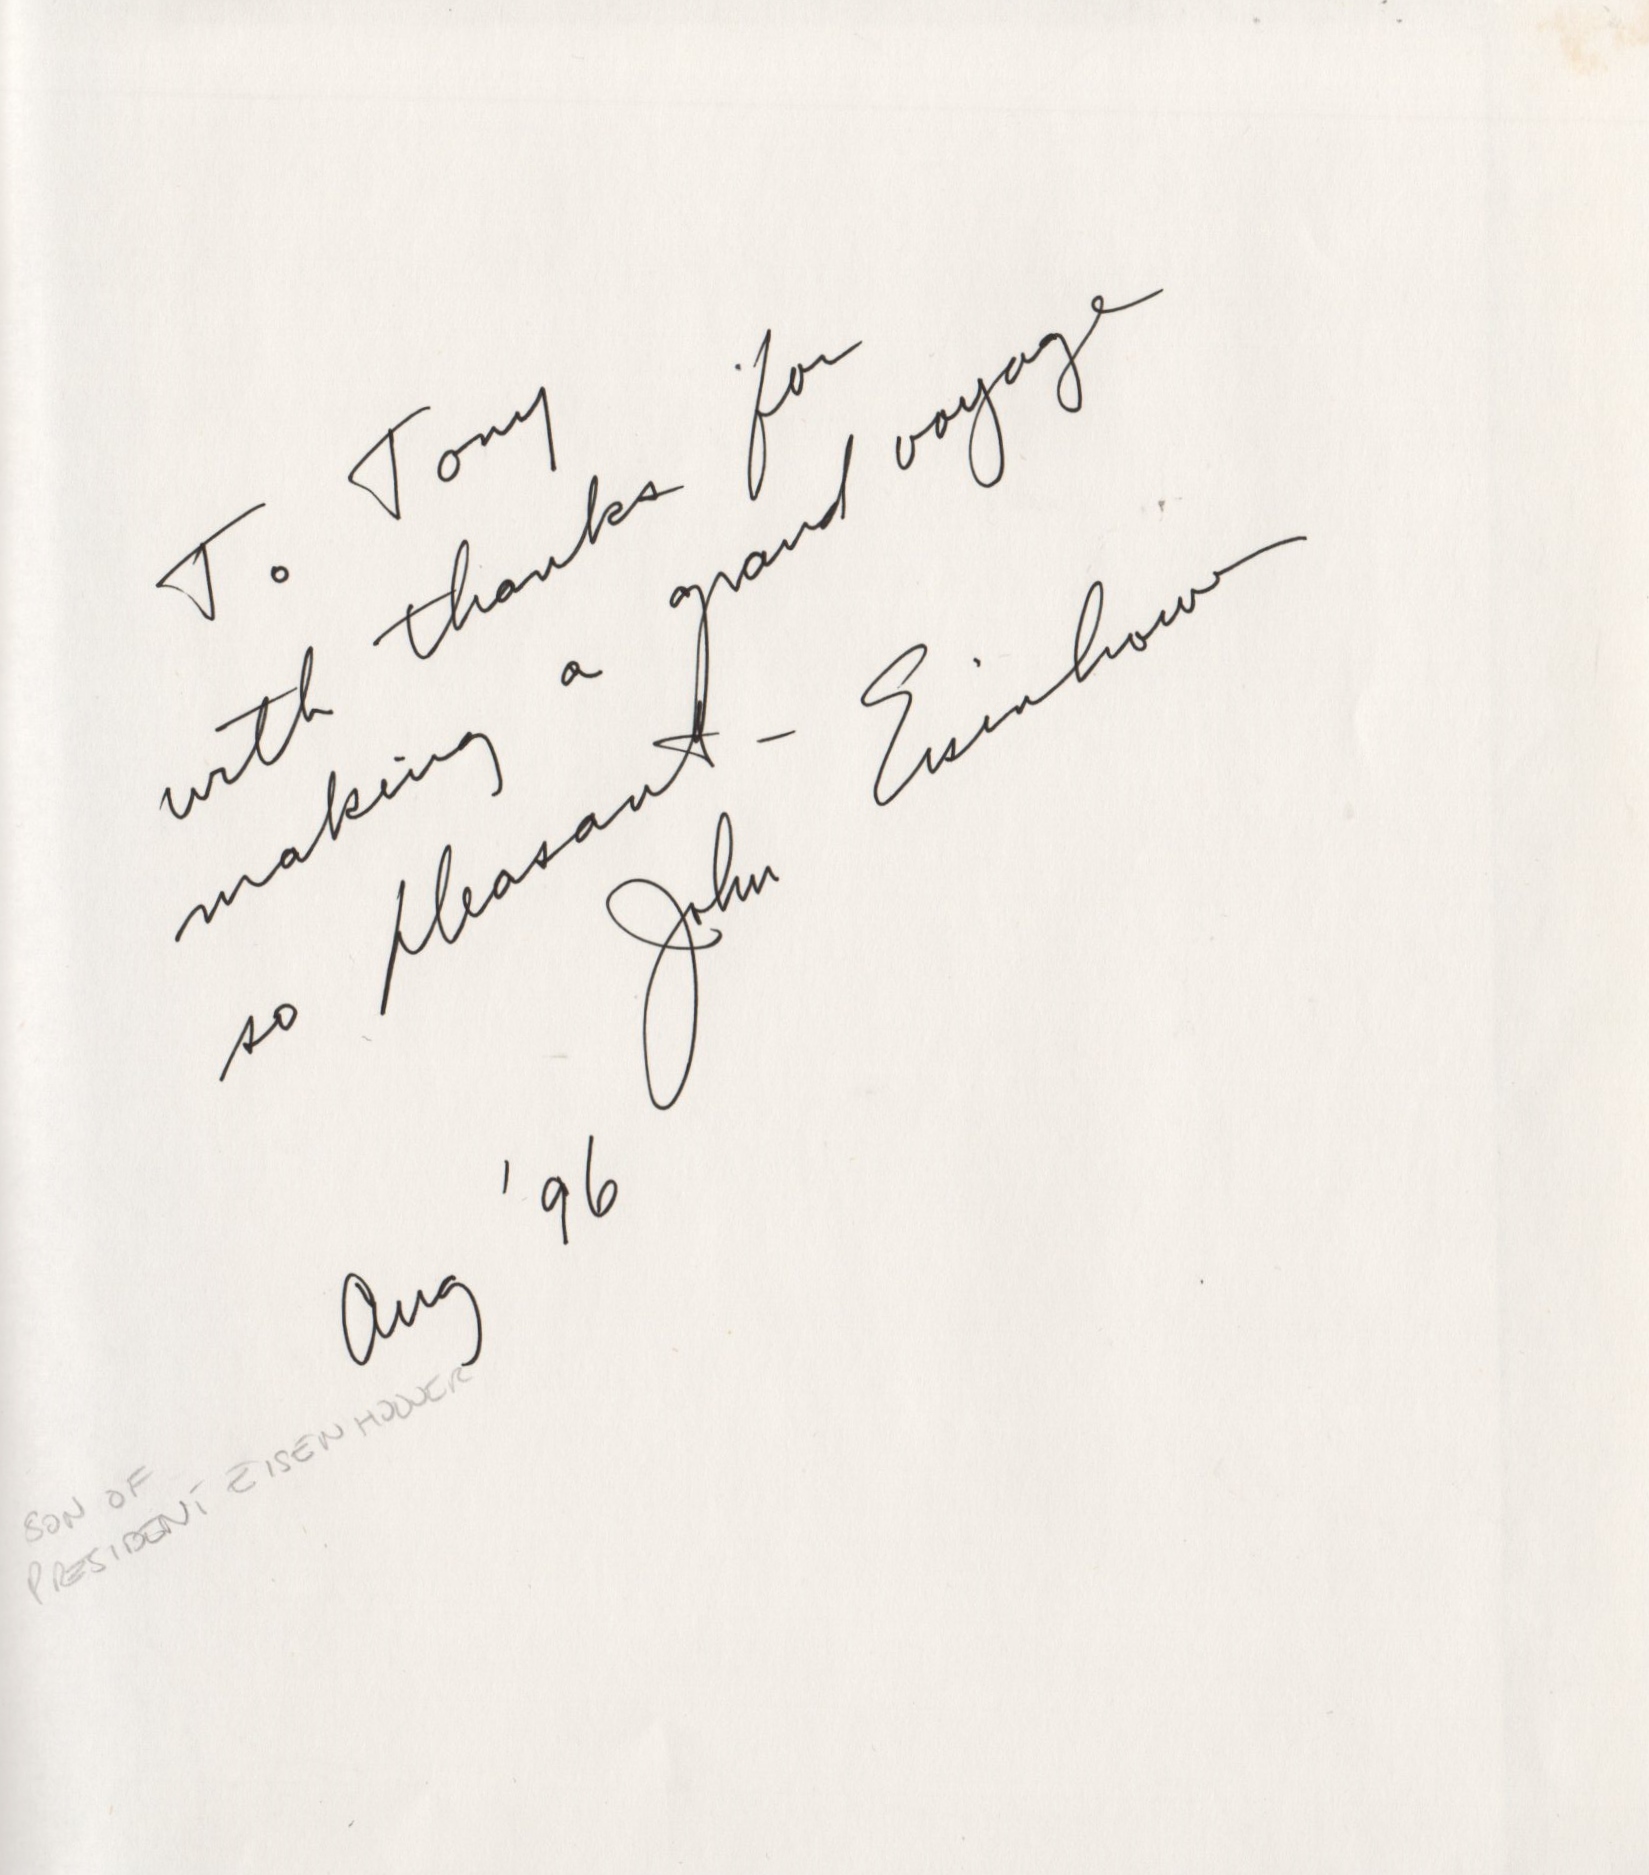 FAMOUS MEN & WOMEN: A hardback 4to Guest Book containing over 40 signatures by various well-known - Image 7 of 10